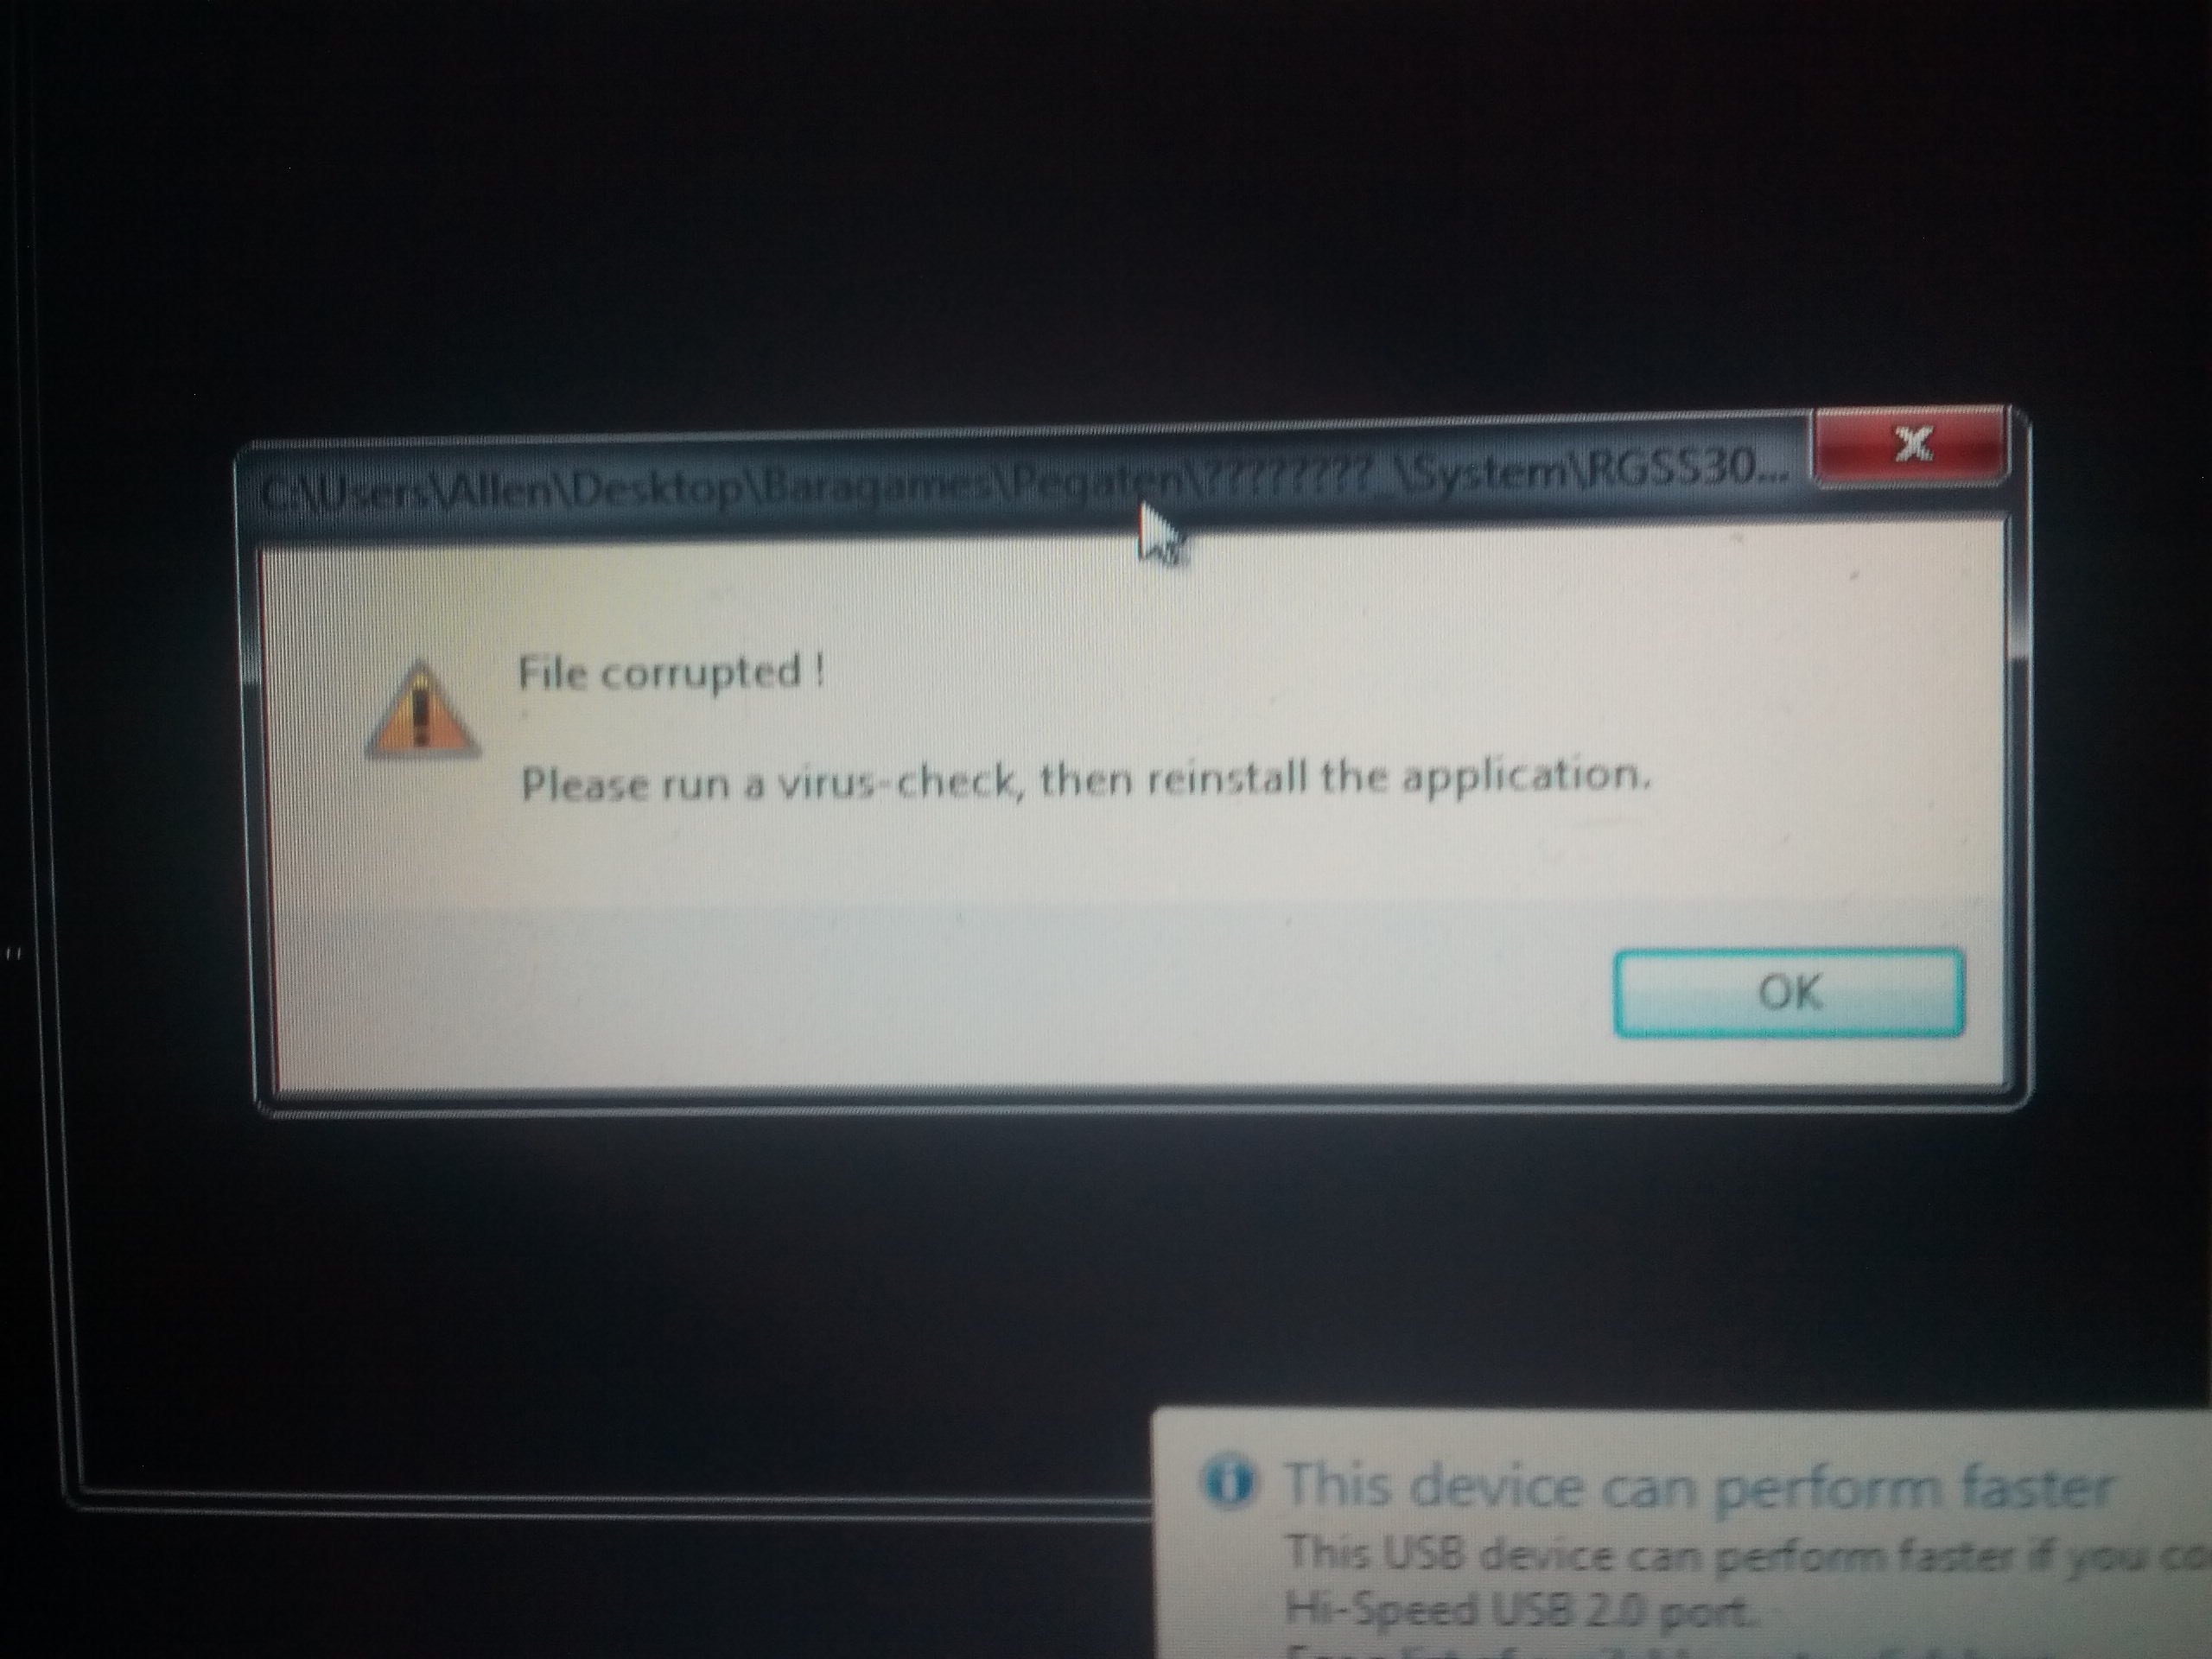 file corrupted please run a virus=check then reinstall